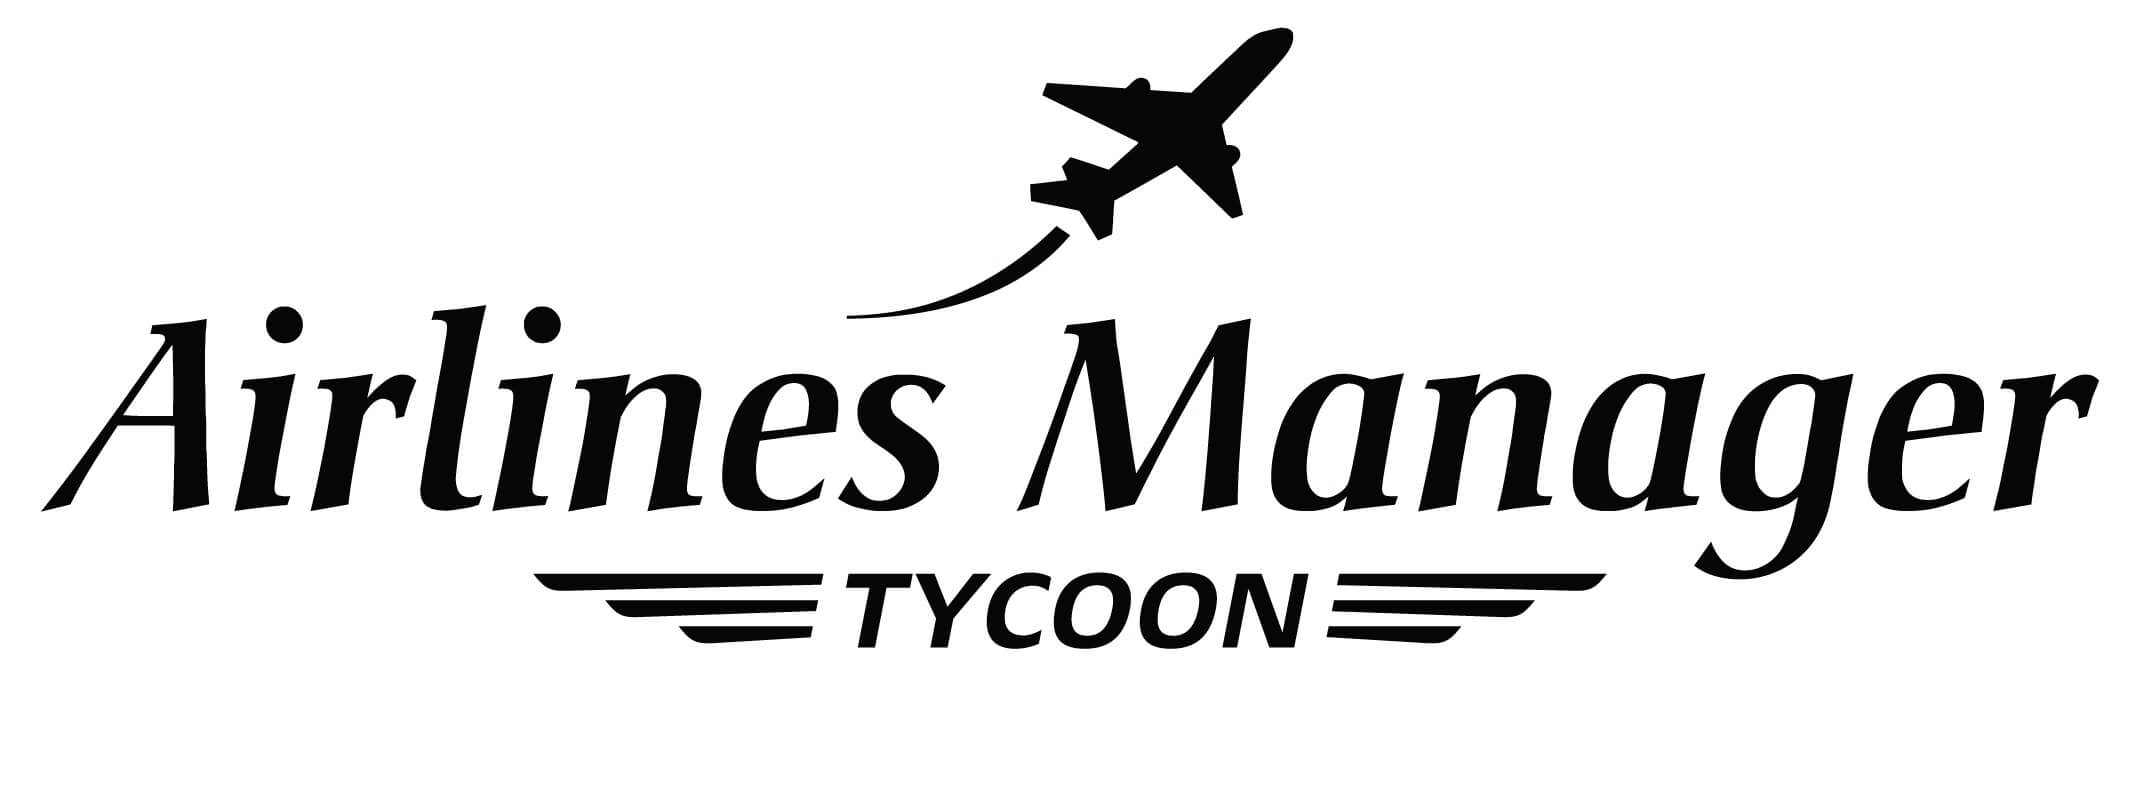 Airlines Manager Tycoon astuce triche